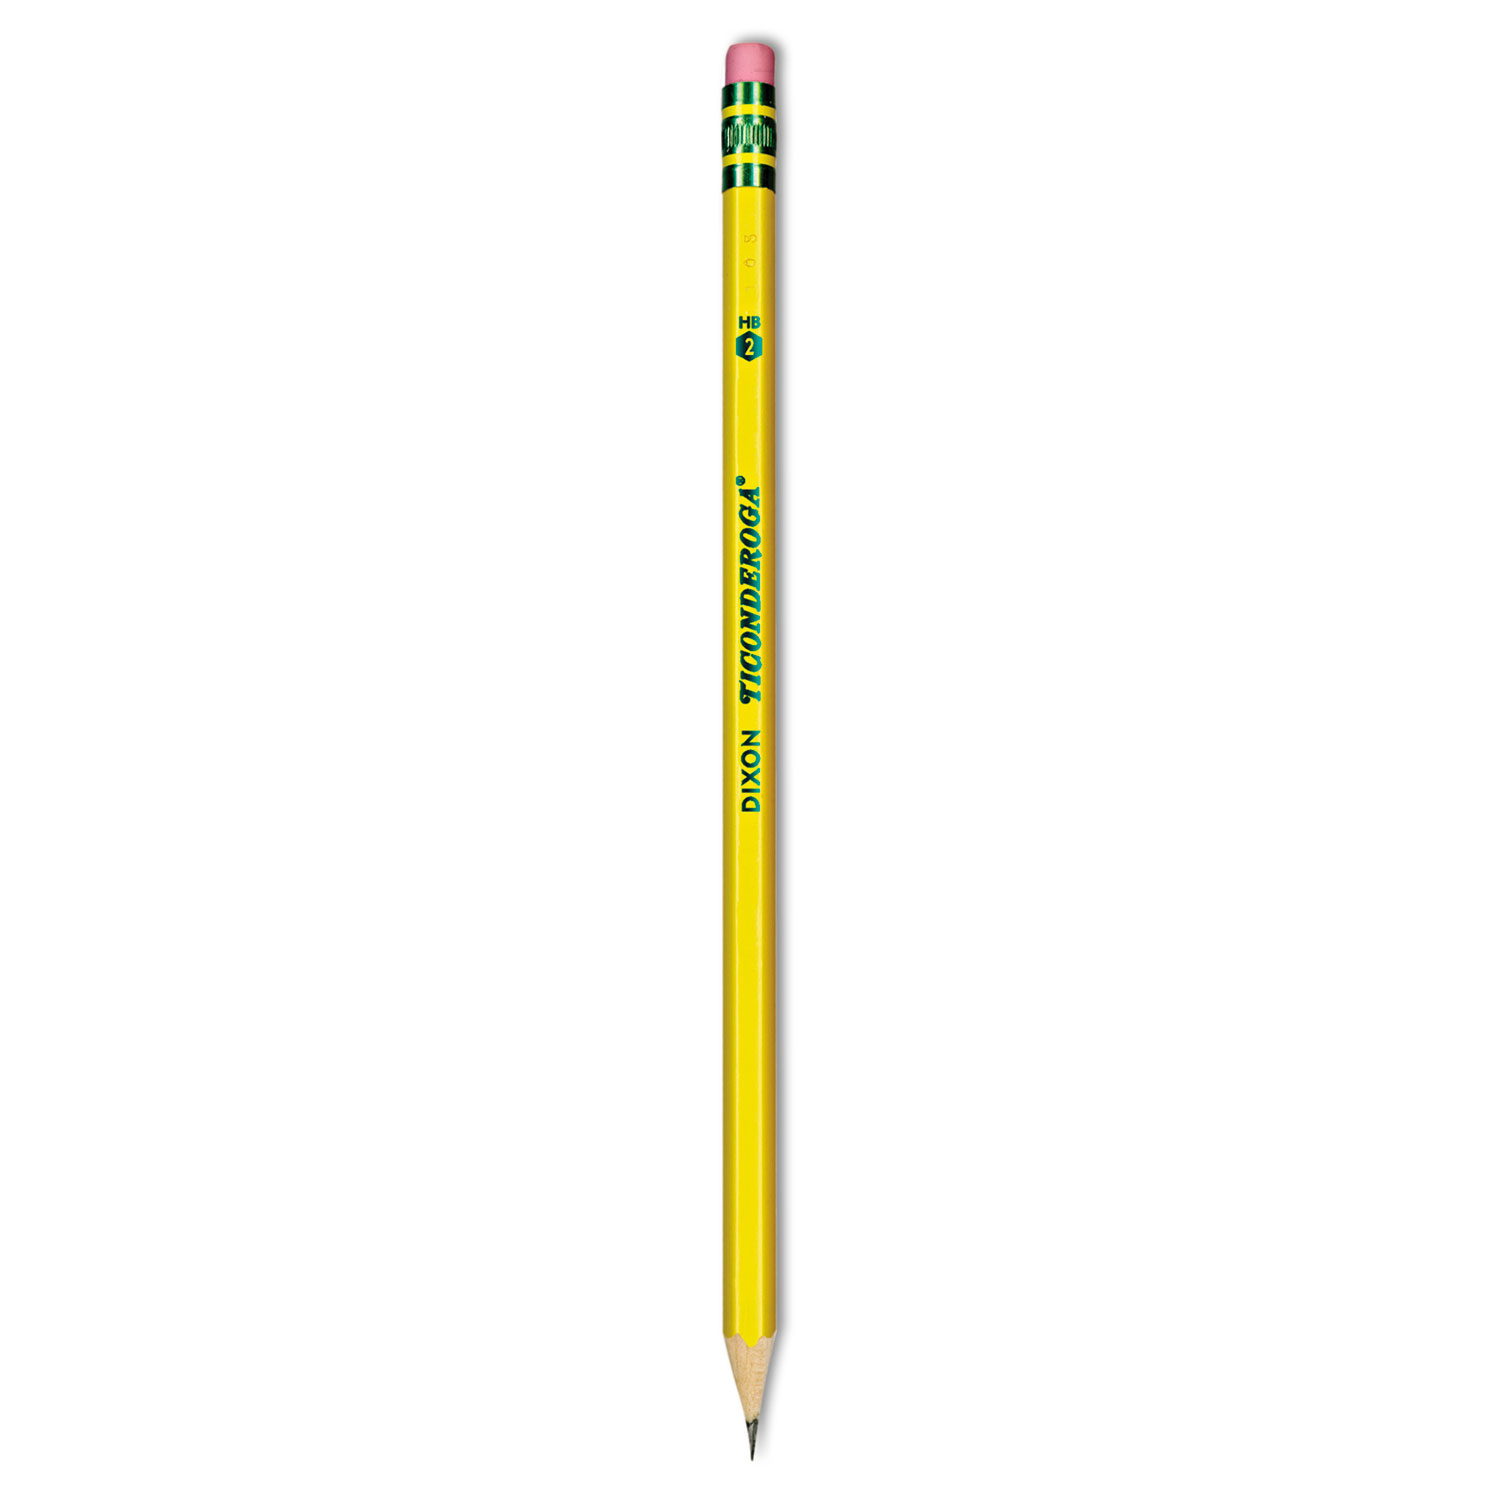 is there a number 1 pencil